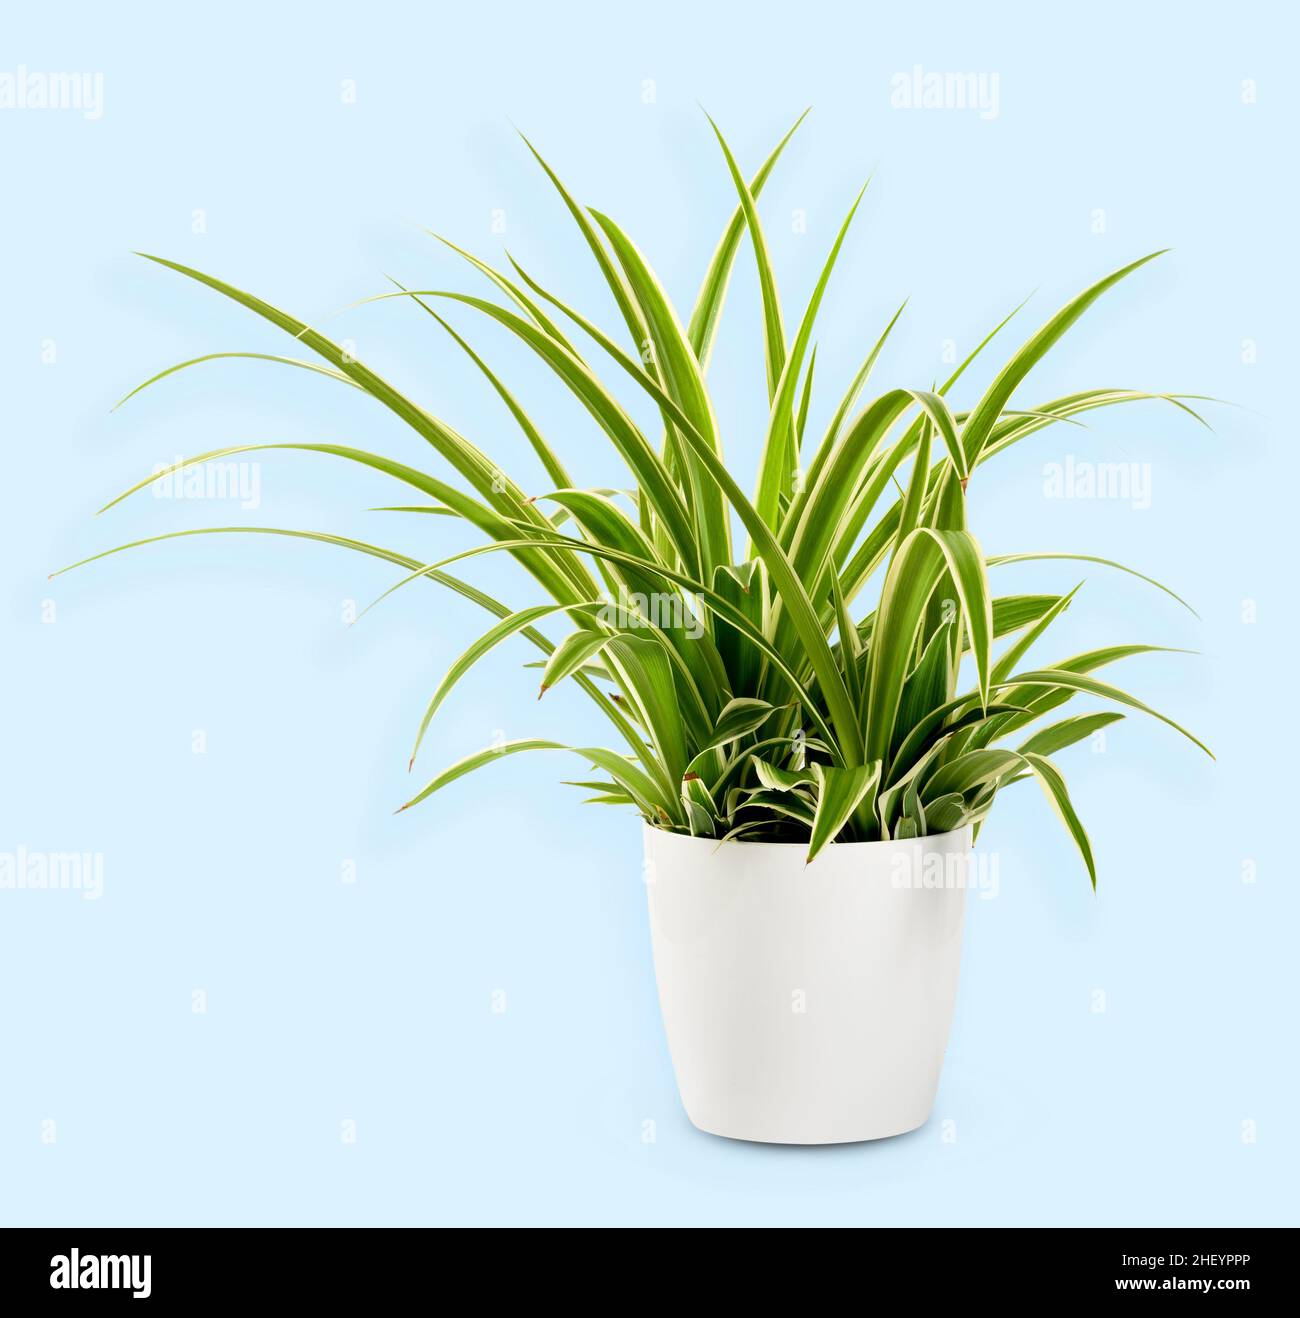 Potted Chlorophytum laxum plant with green leaves with light strip placed in studio against blue background Stock Photo